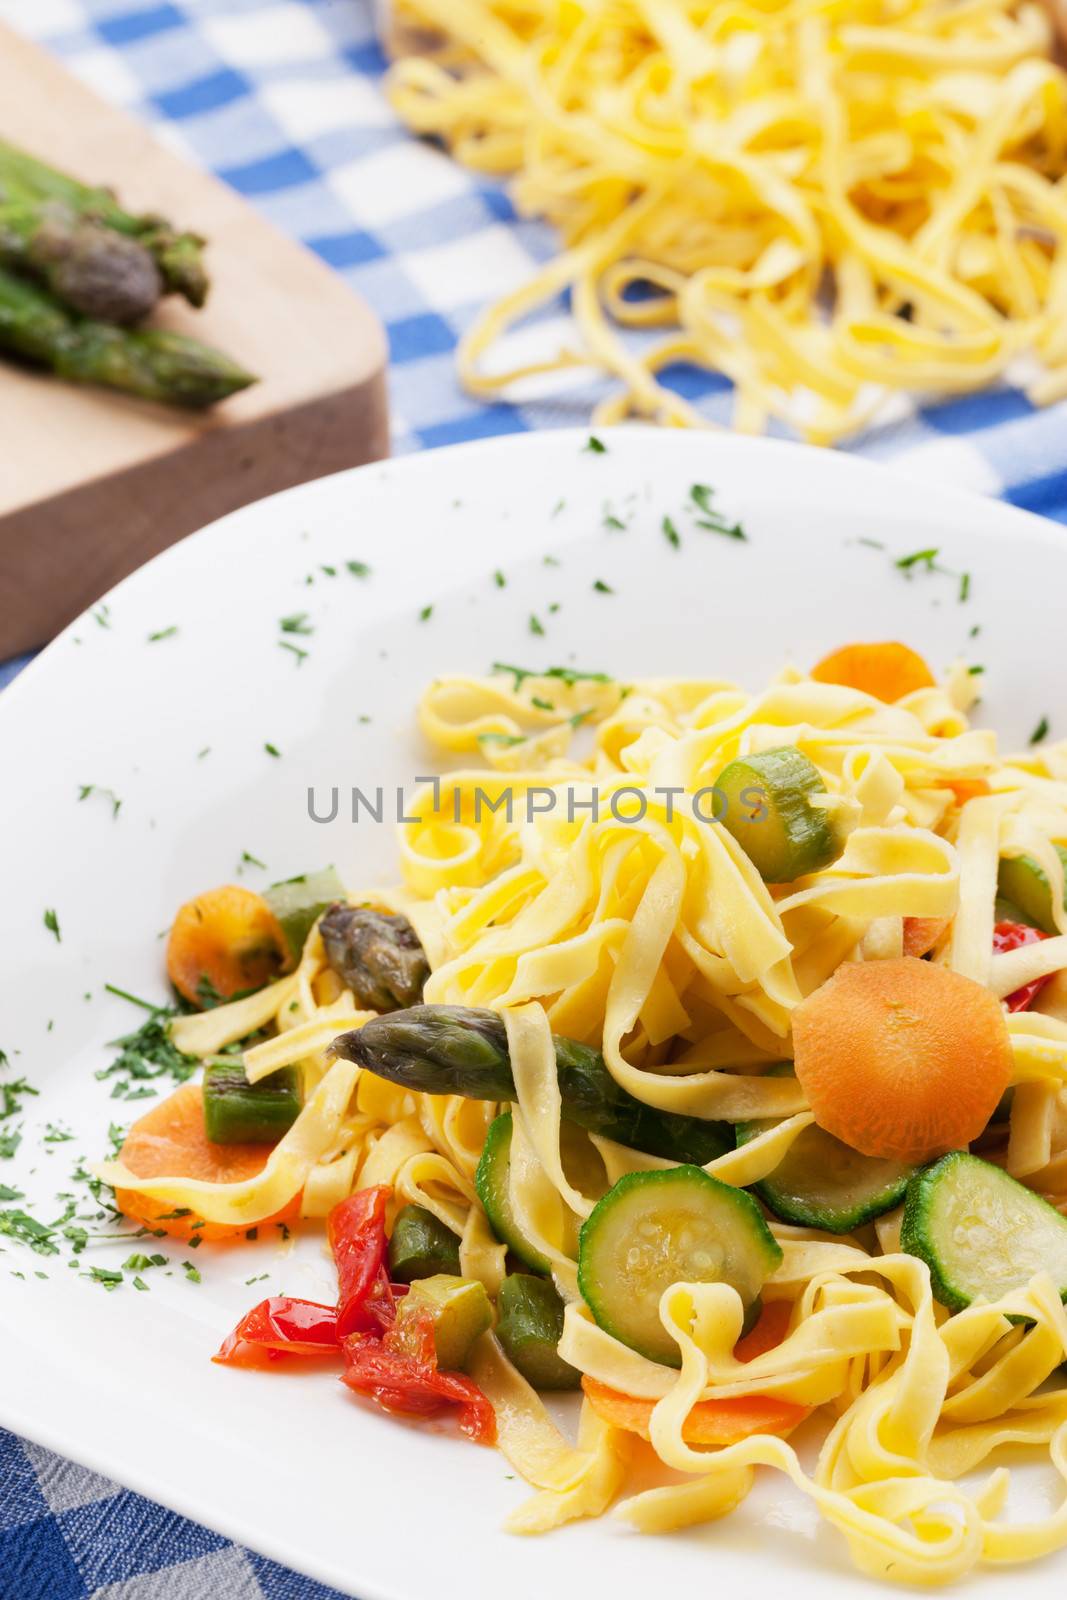 Traditional tagliatelle with summer vegetables on checkered tablecloth.